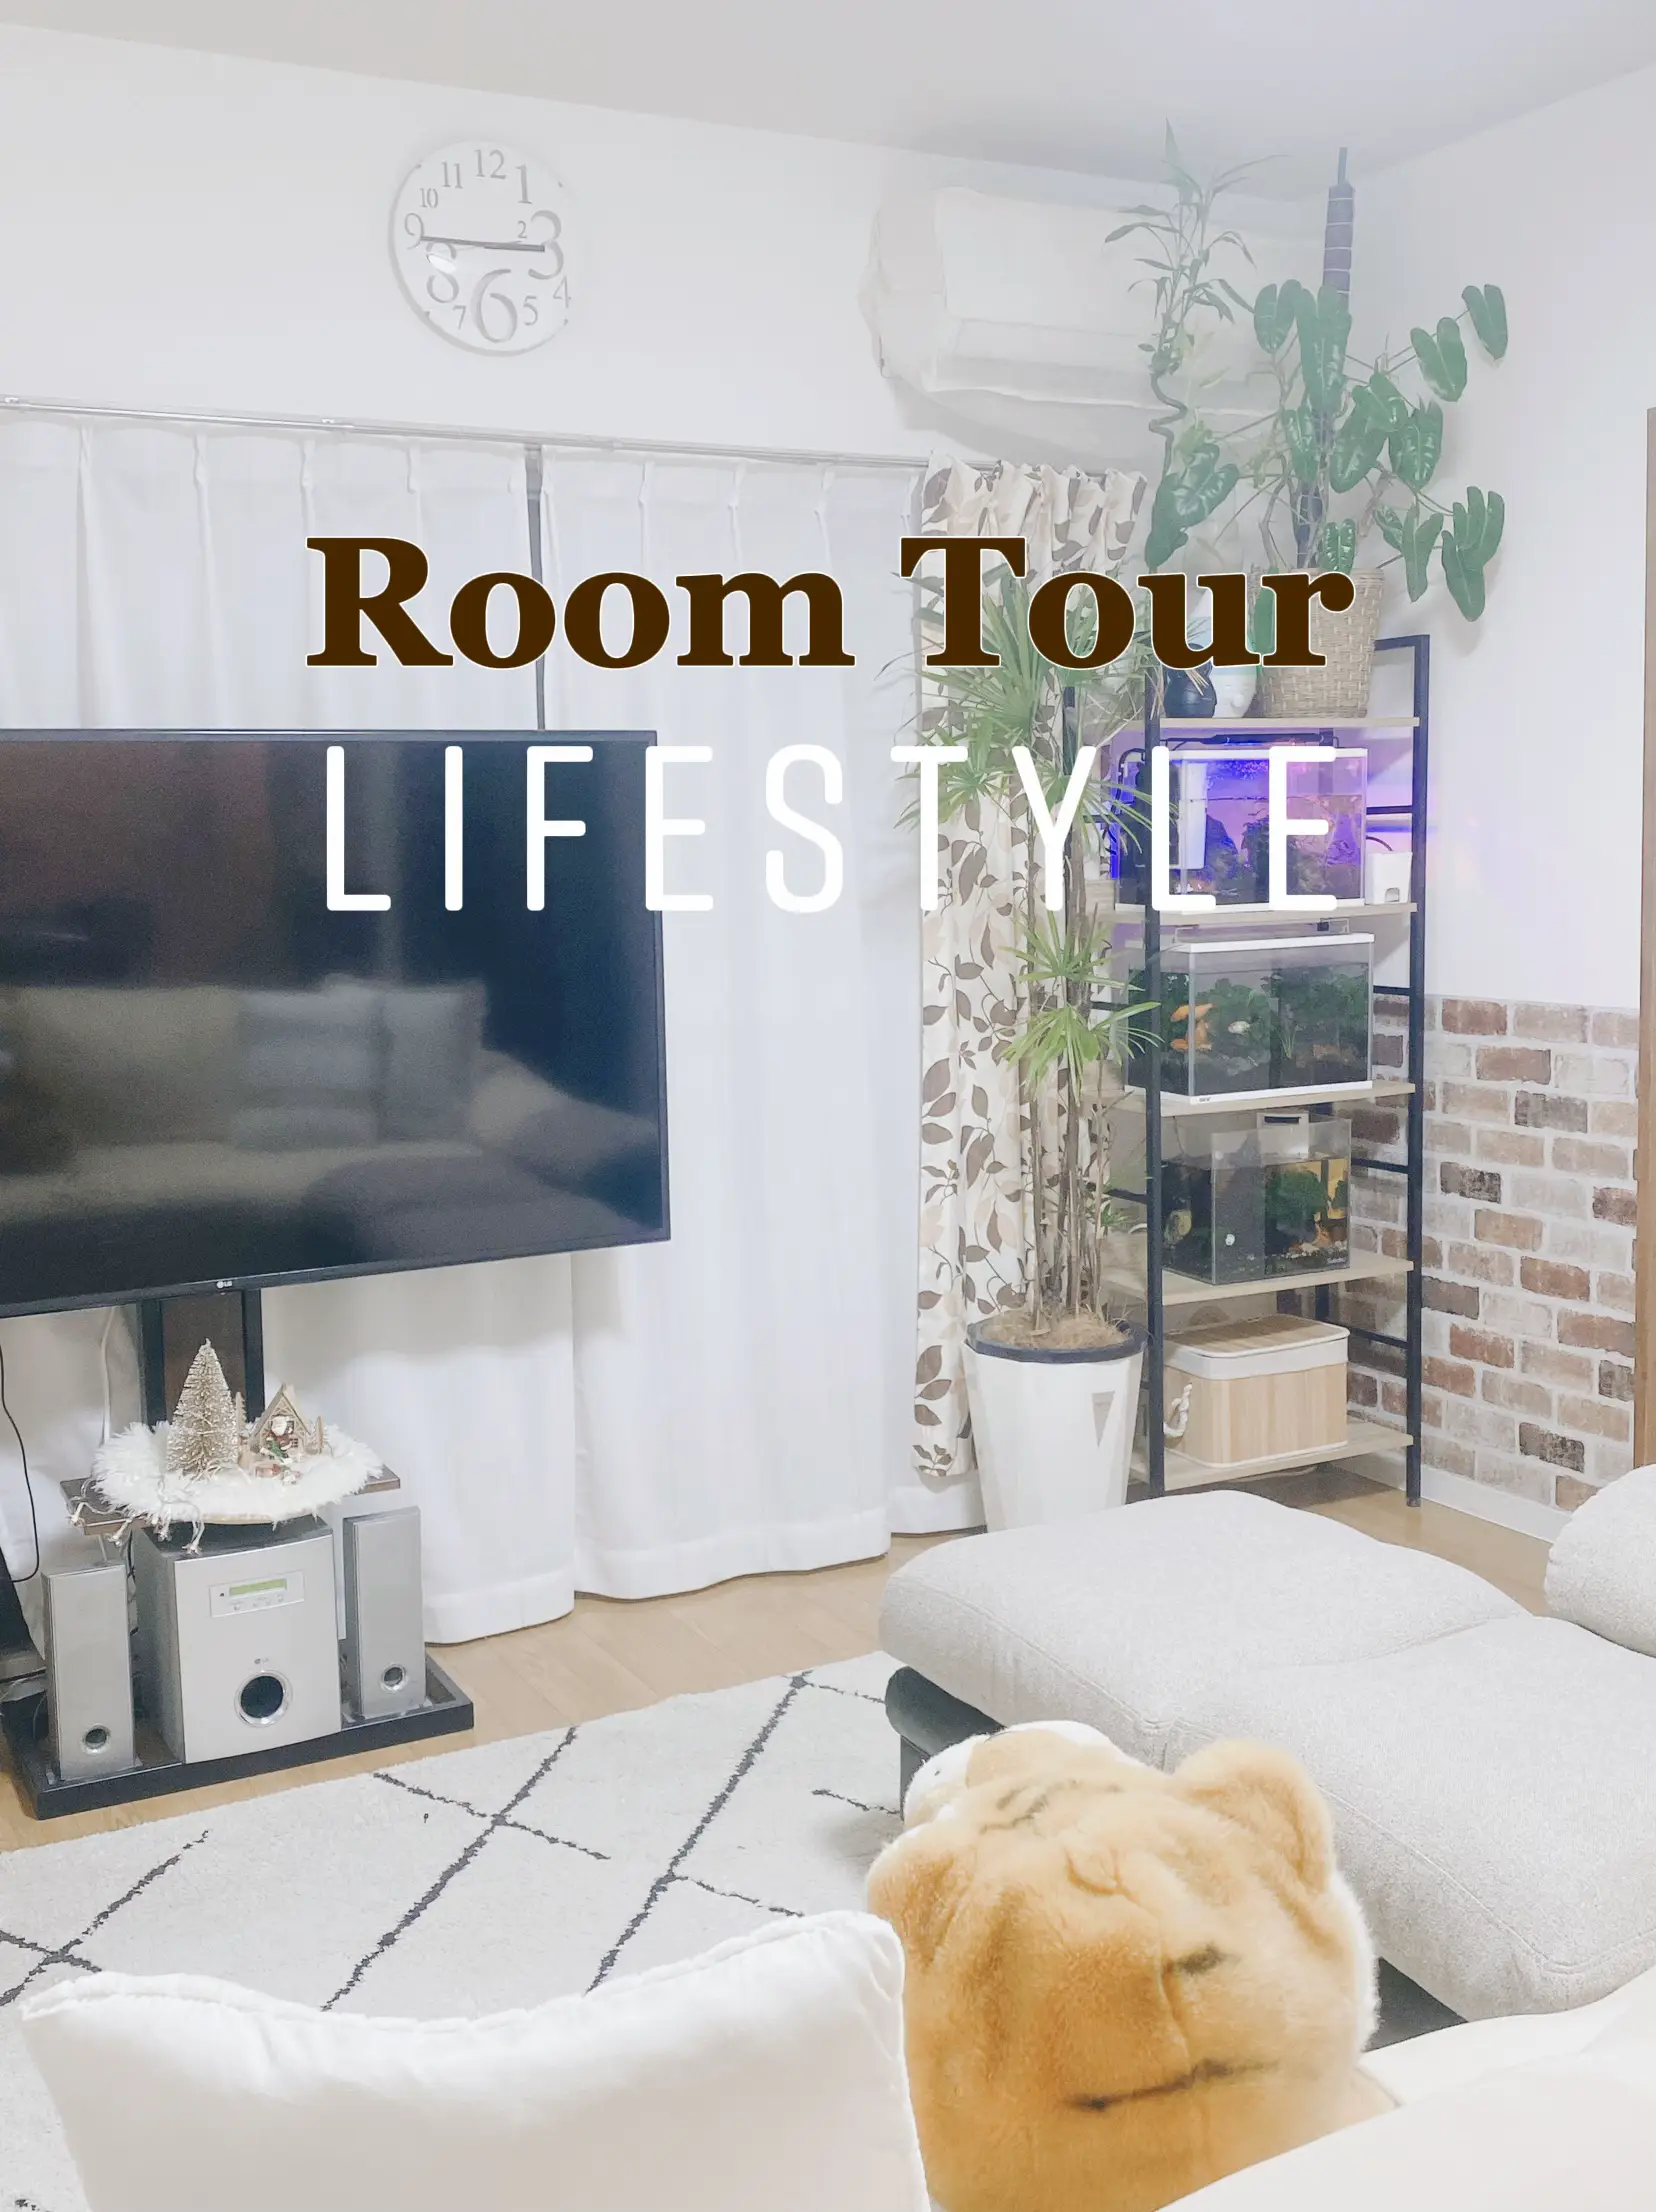 Room Tour, Gallery posted by 白と木大好きマリー